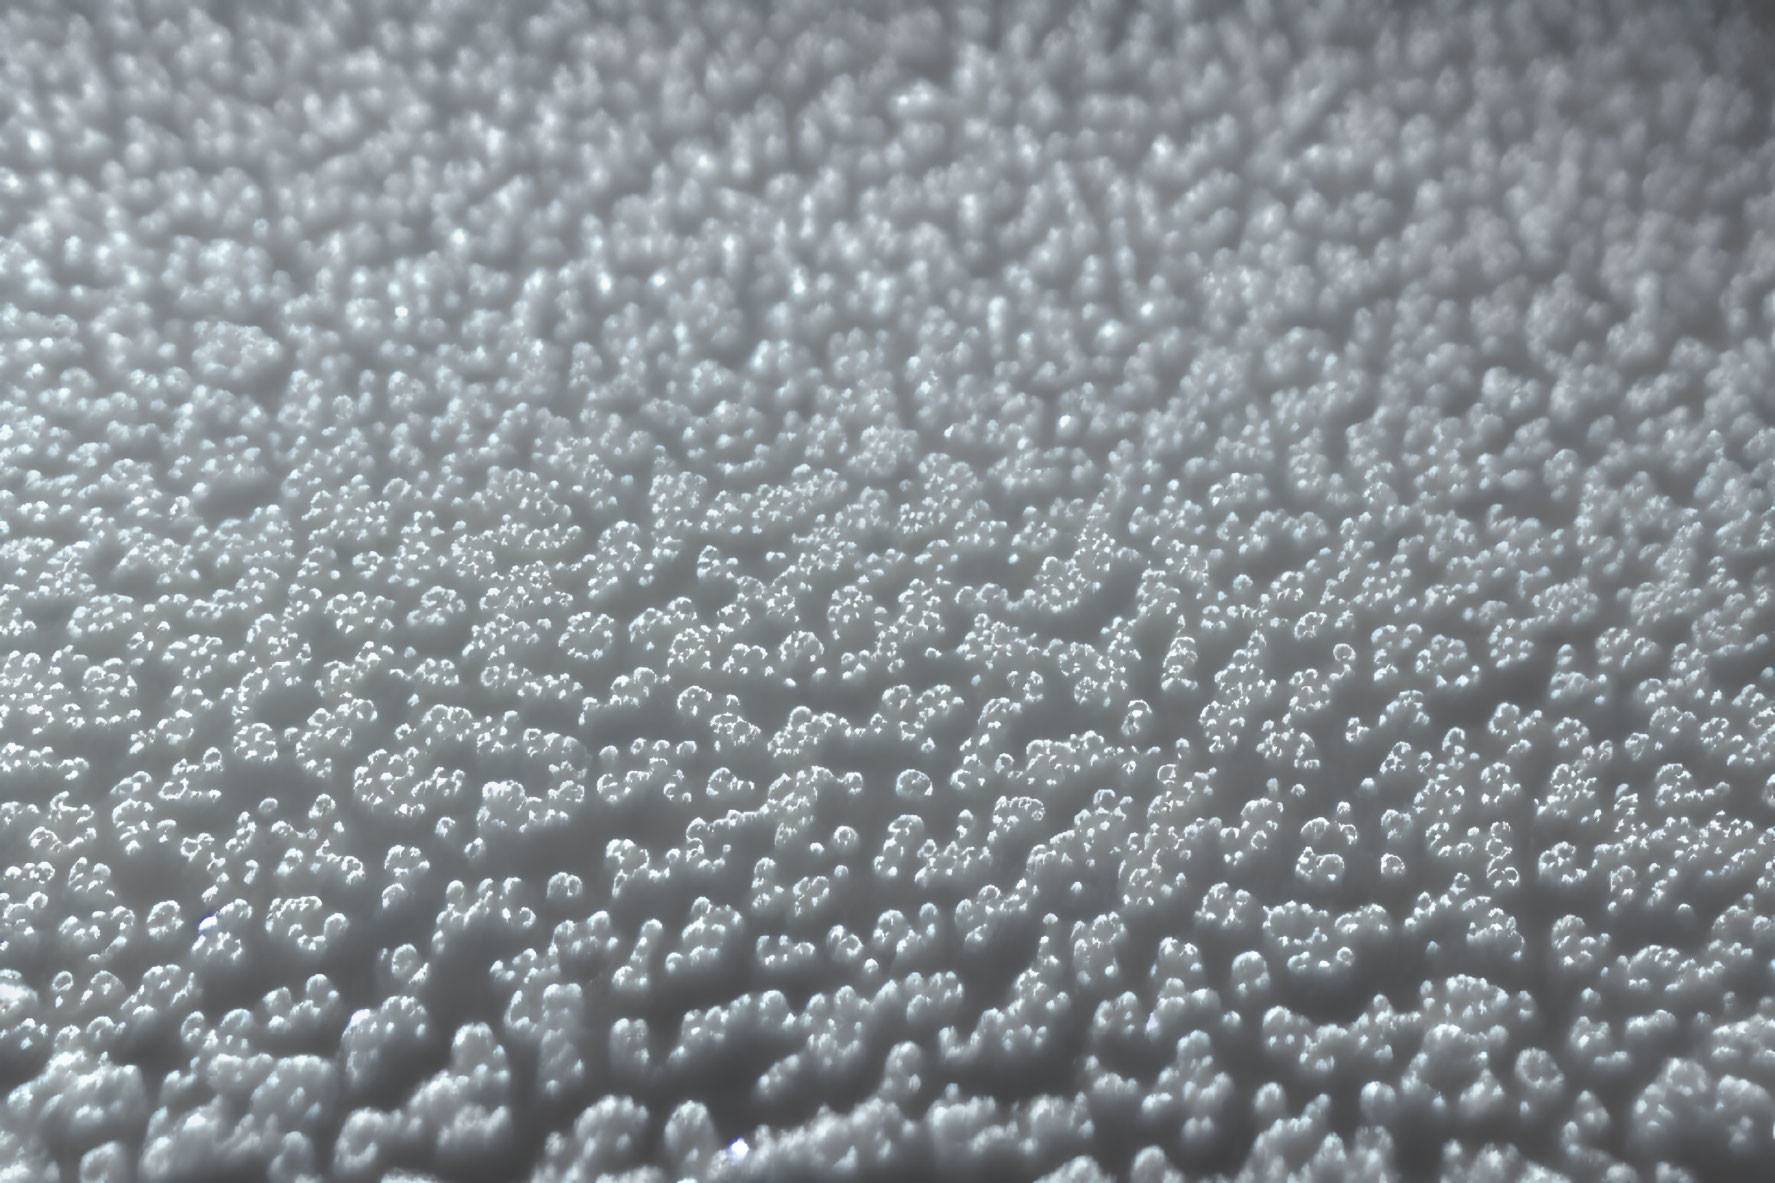 Textured surface with small white round bubbles clustered together